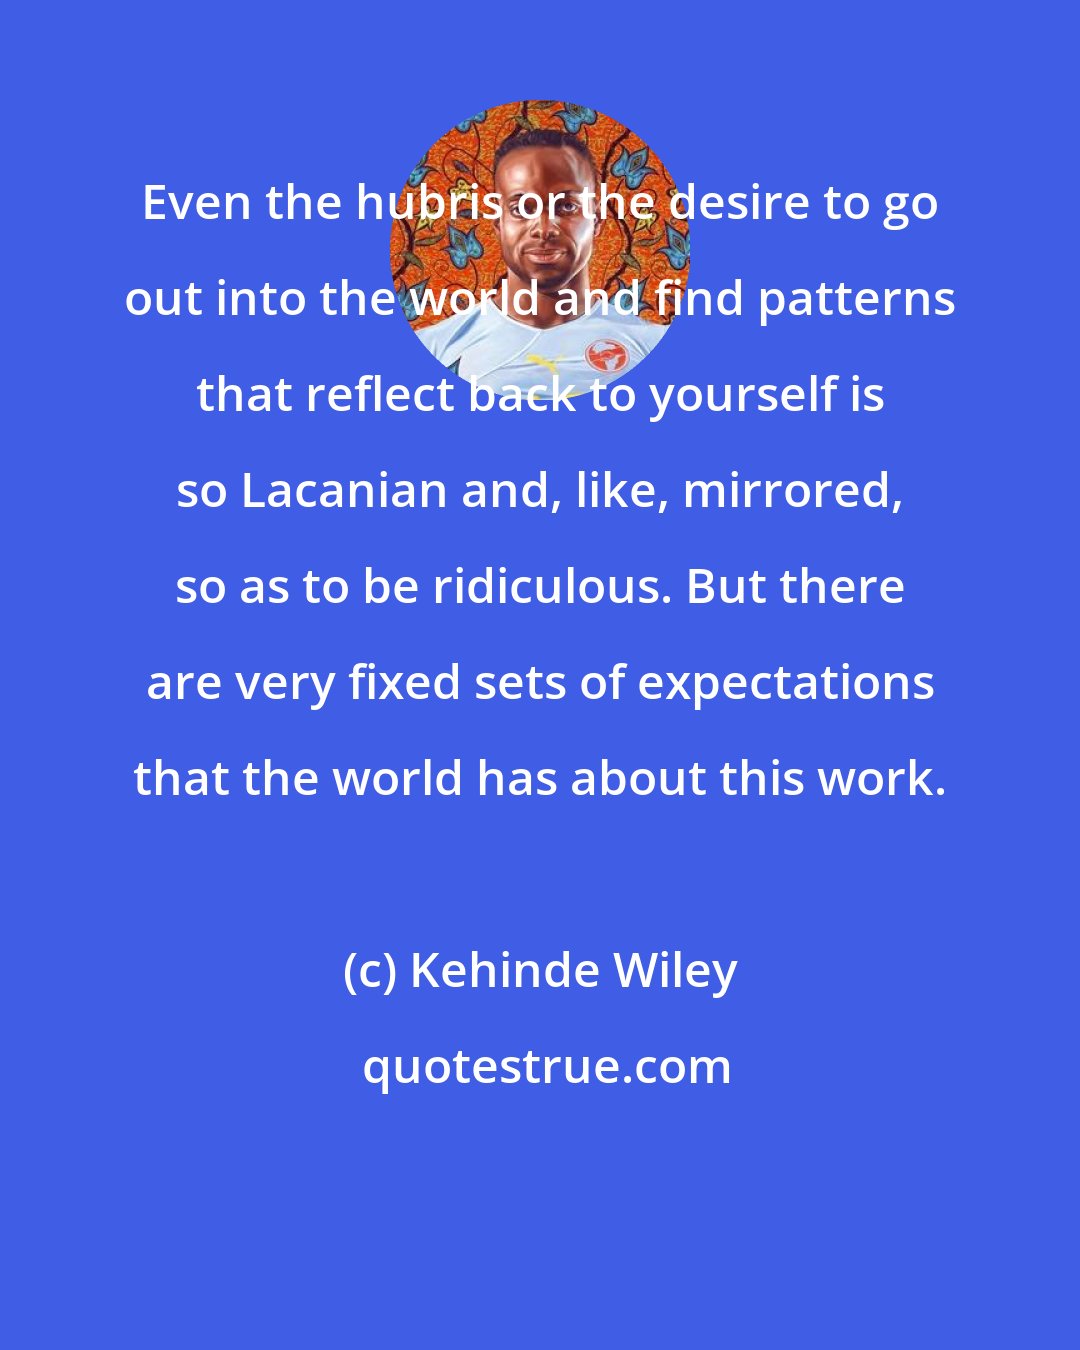 Kehinde Wiley: Even the hubris or the desire to go out into the world and find patterns that reflect back to yourself is so Lacanian and, like, mirrored, so as to be ridiculous. But there are very fixed sets of expectations that the world has about this work.